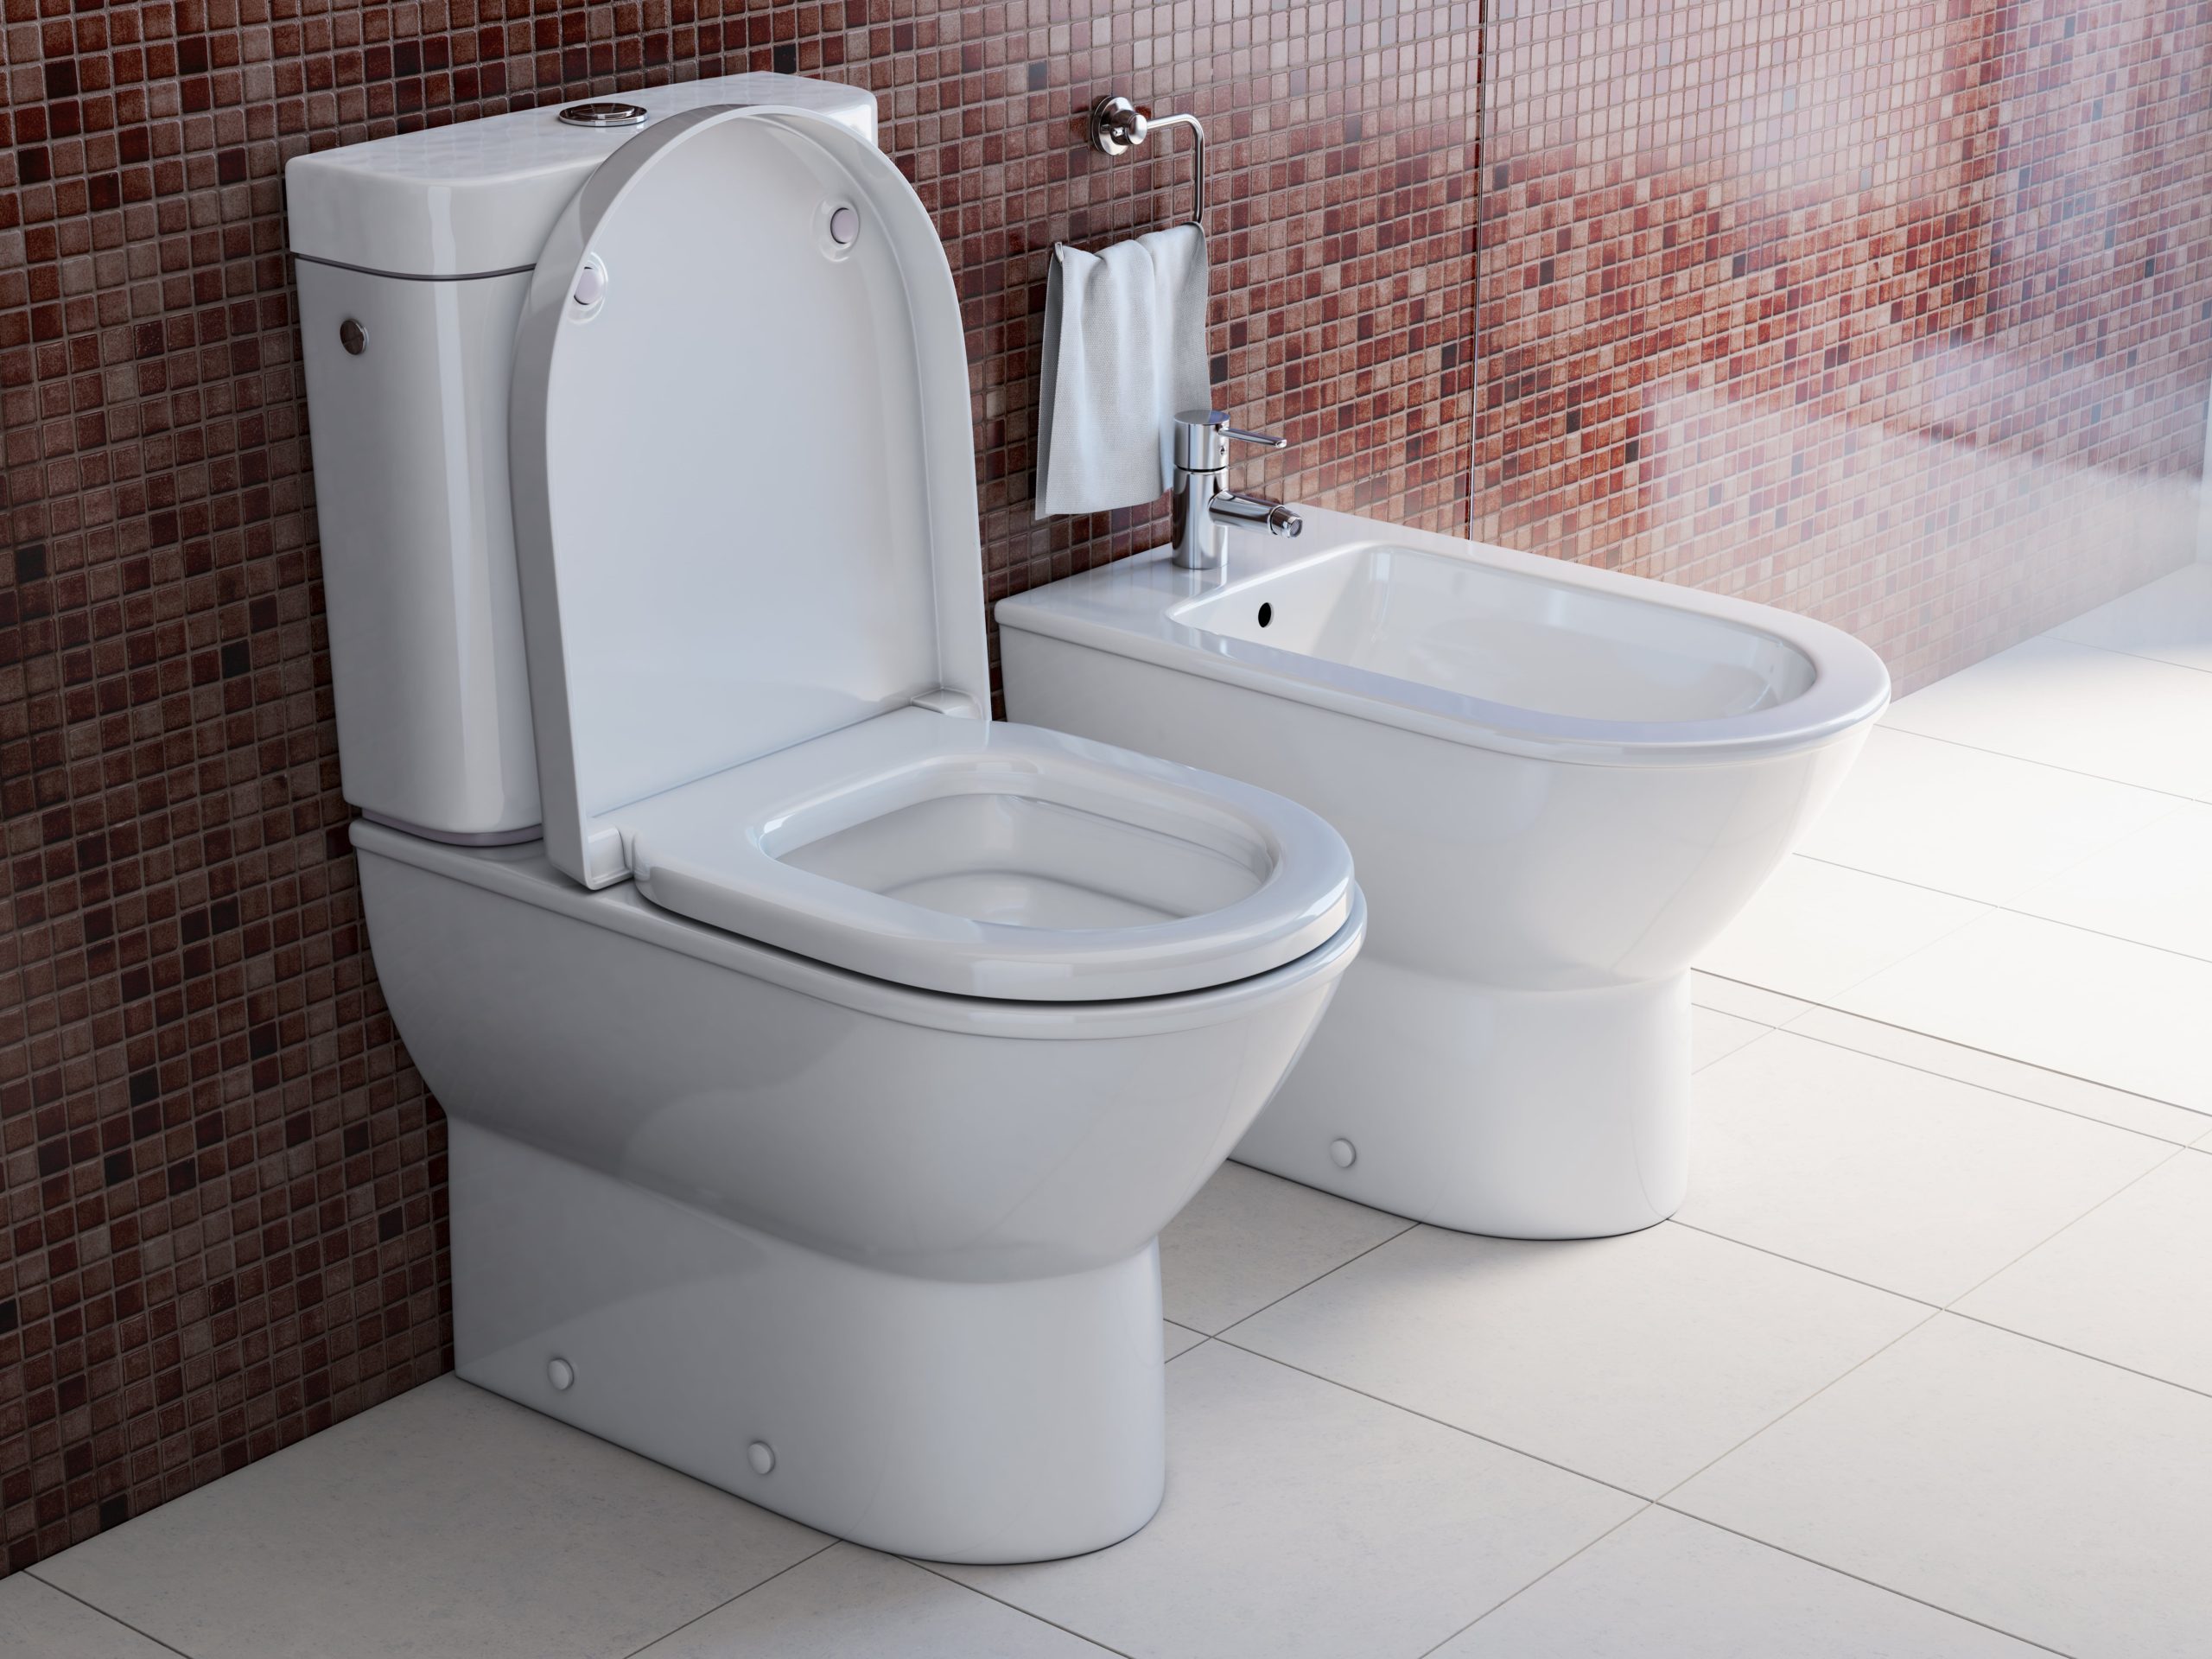 A toilet and a bidet next to each other in a bathroom.